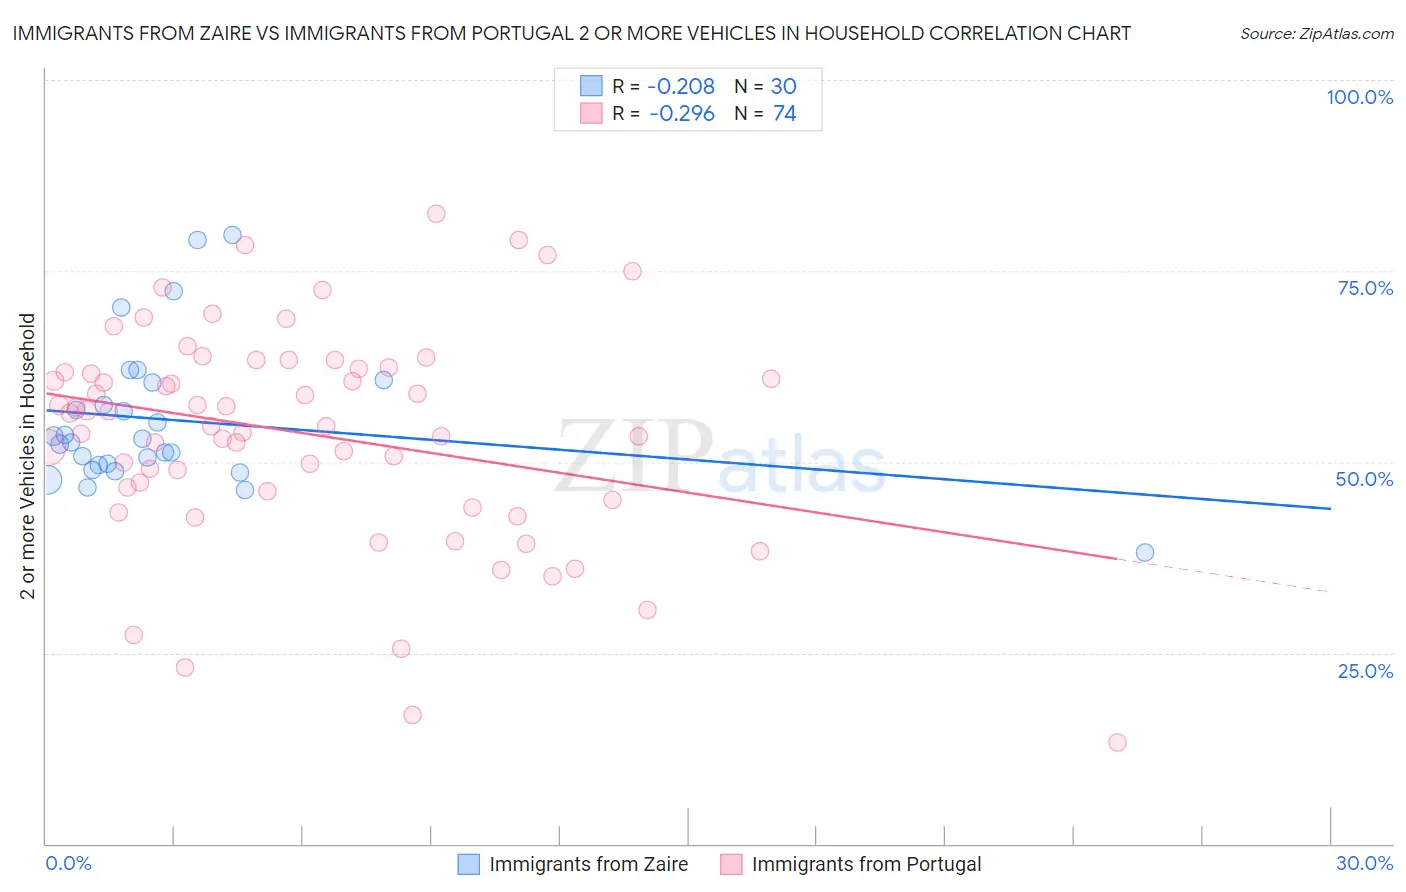 Immigrants from Zaire vs Immigrants from Portugal 2 or more Vehicles in Household